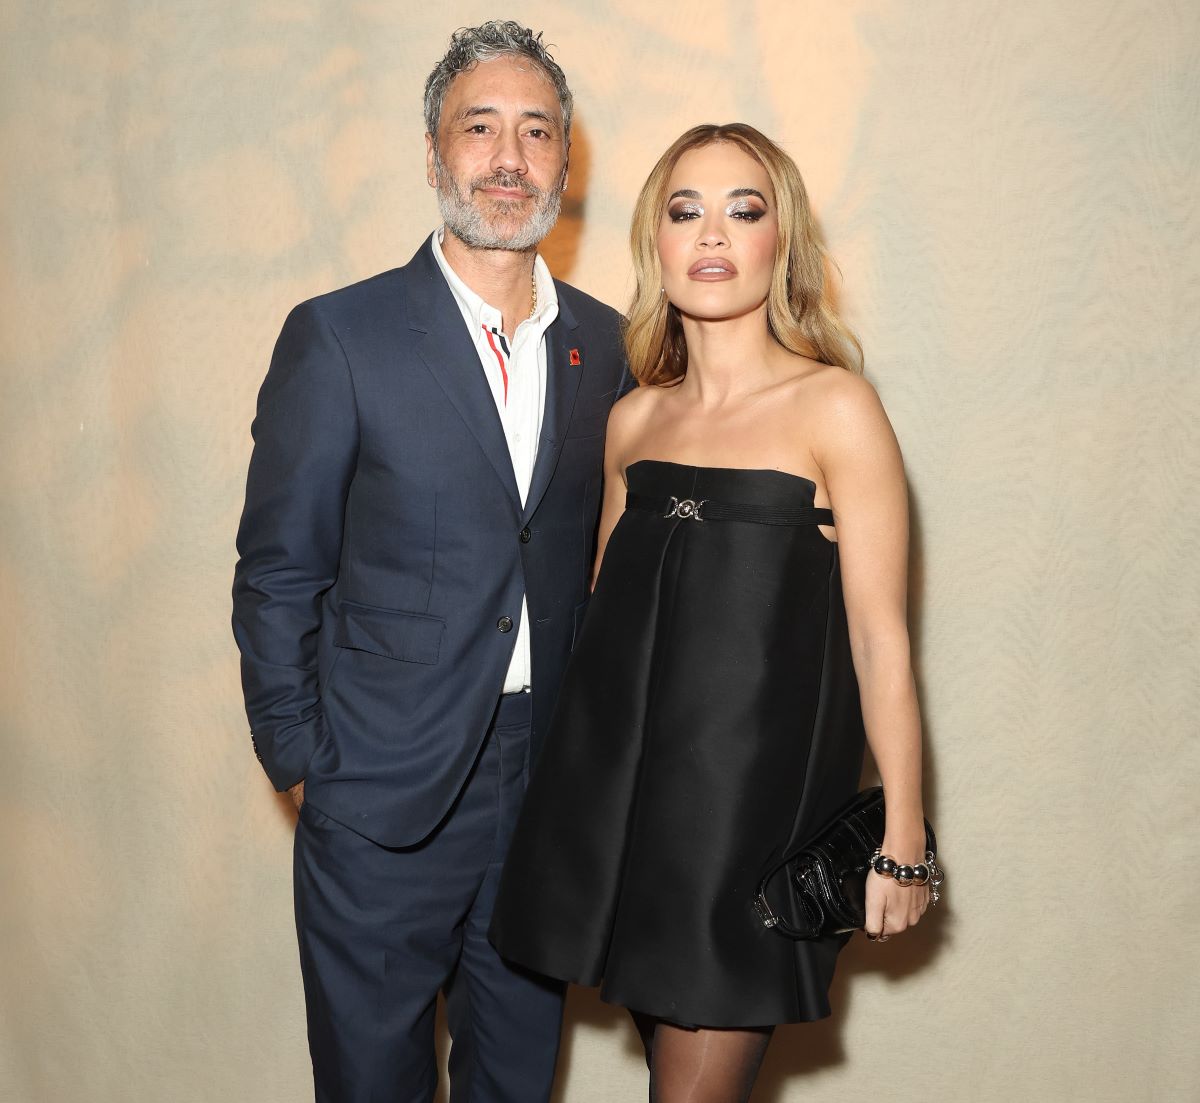 Taika Waititi and Rita Ora pose for photo at the BoF VOICES Gala Dinner